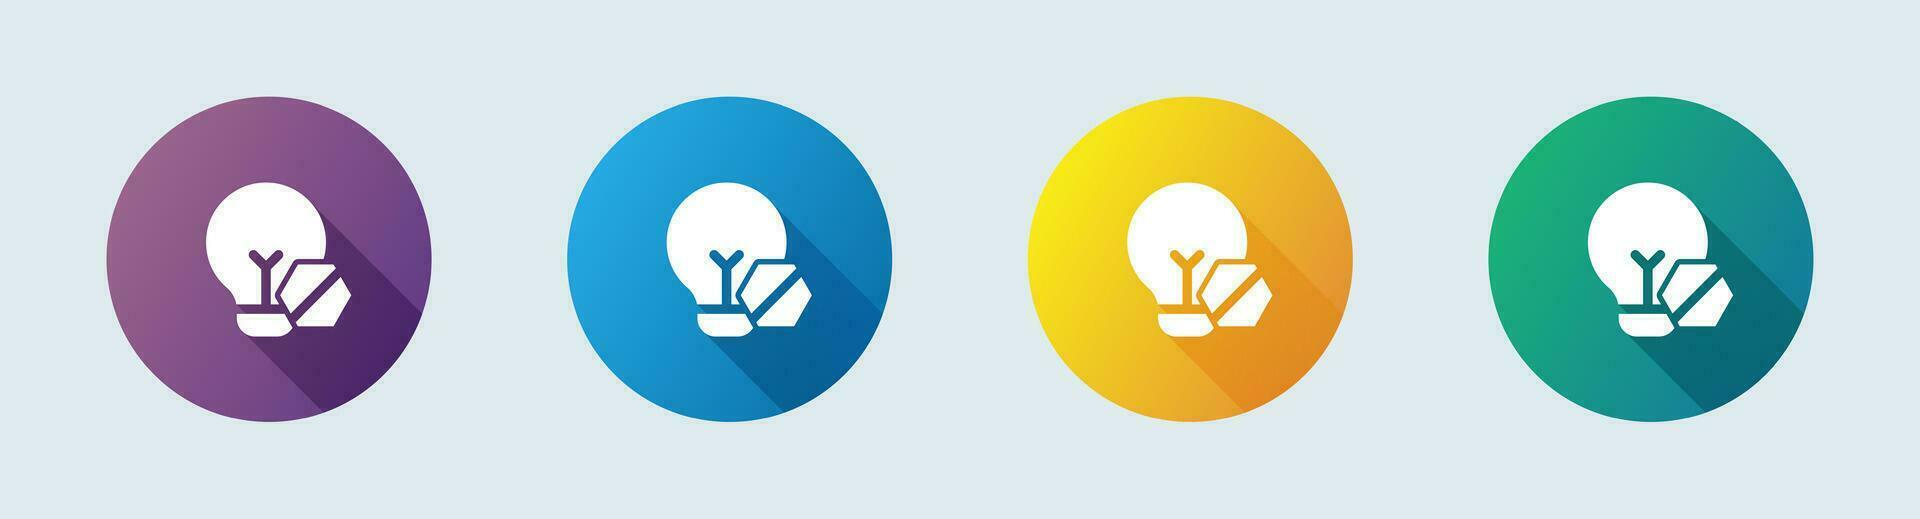 Light off solid icon in flat design style. Bulb signs vector illustration.